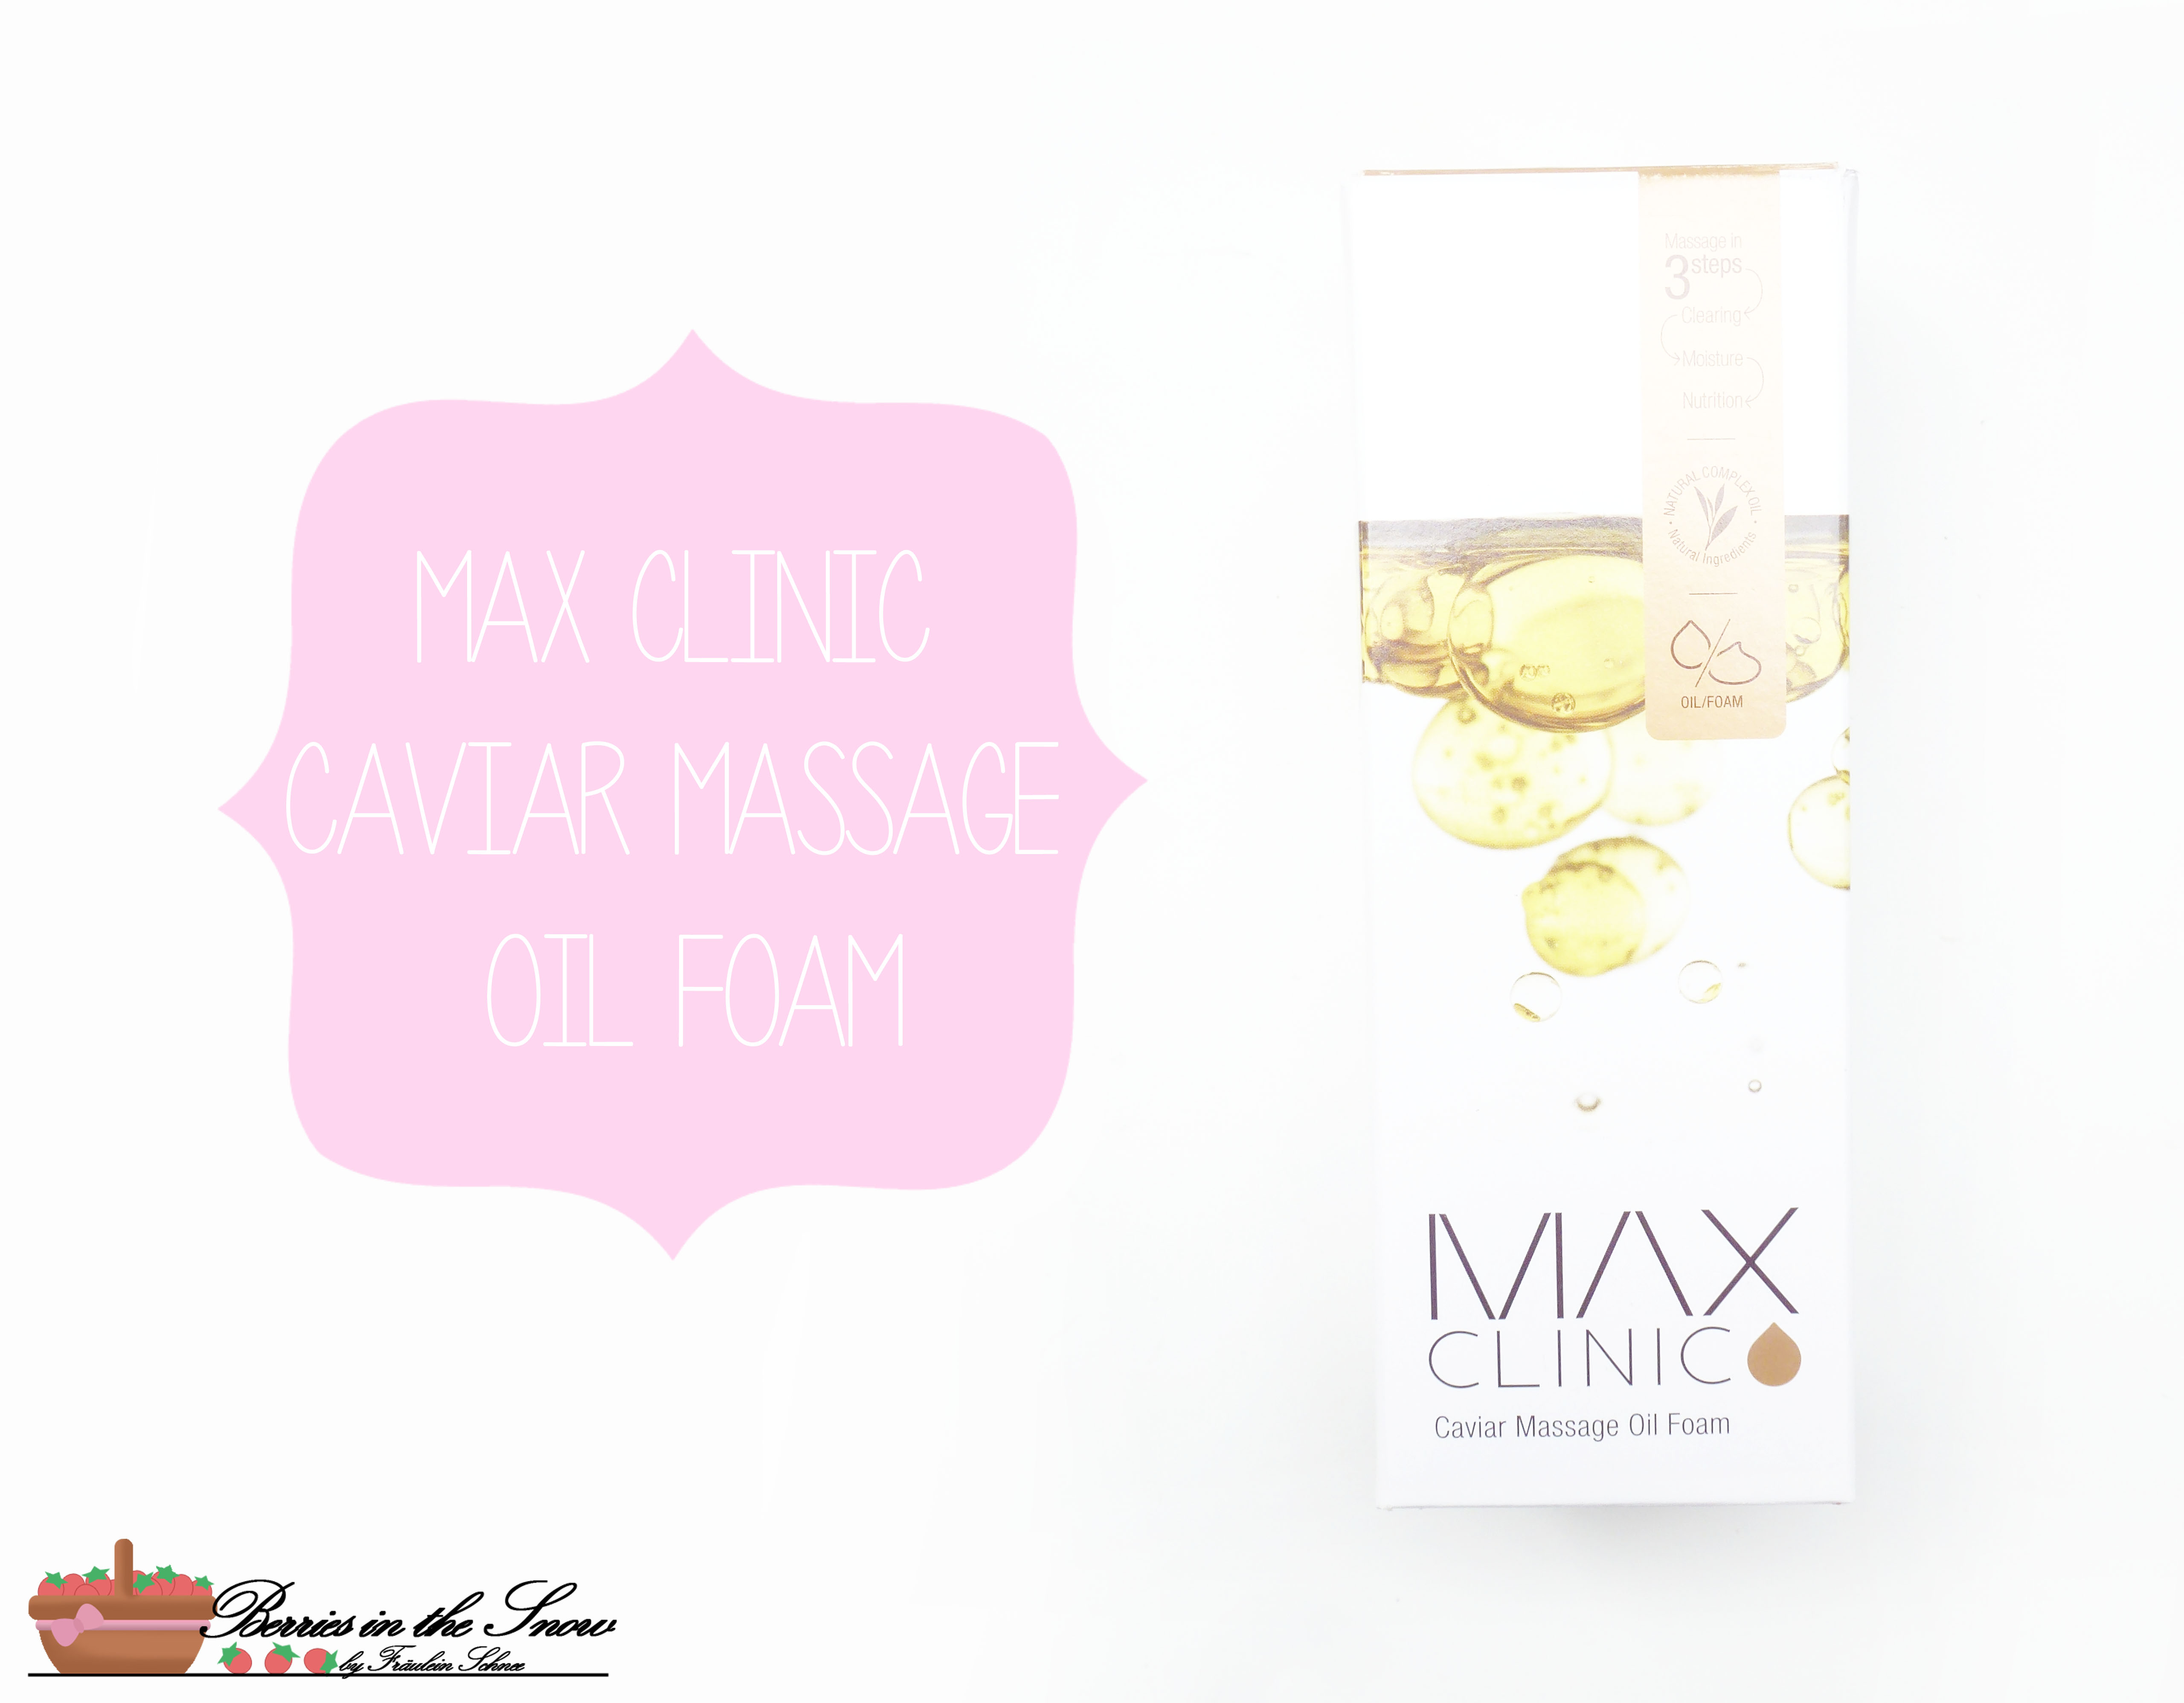 Review Max Clinic Caviar Massage Oil Foam Berries In The Snow